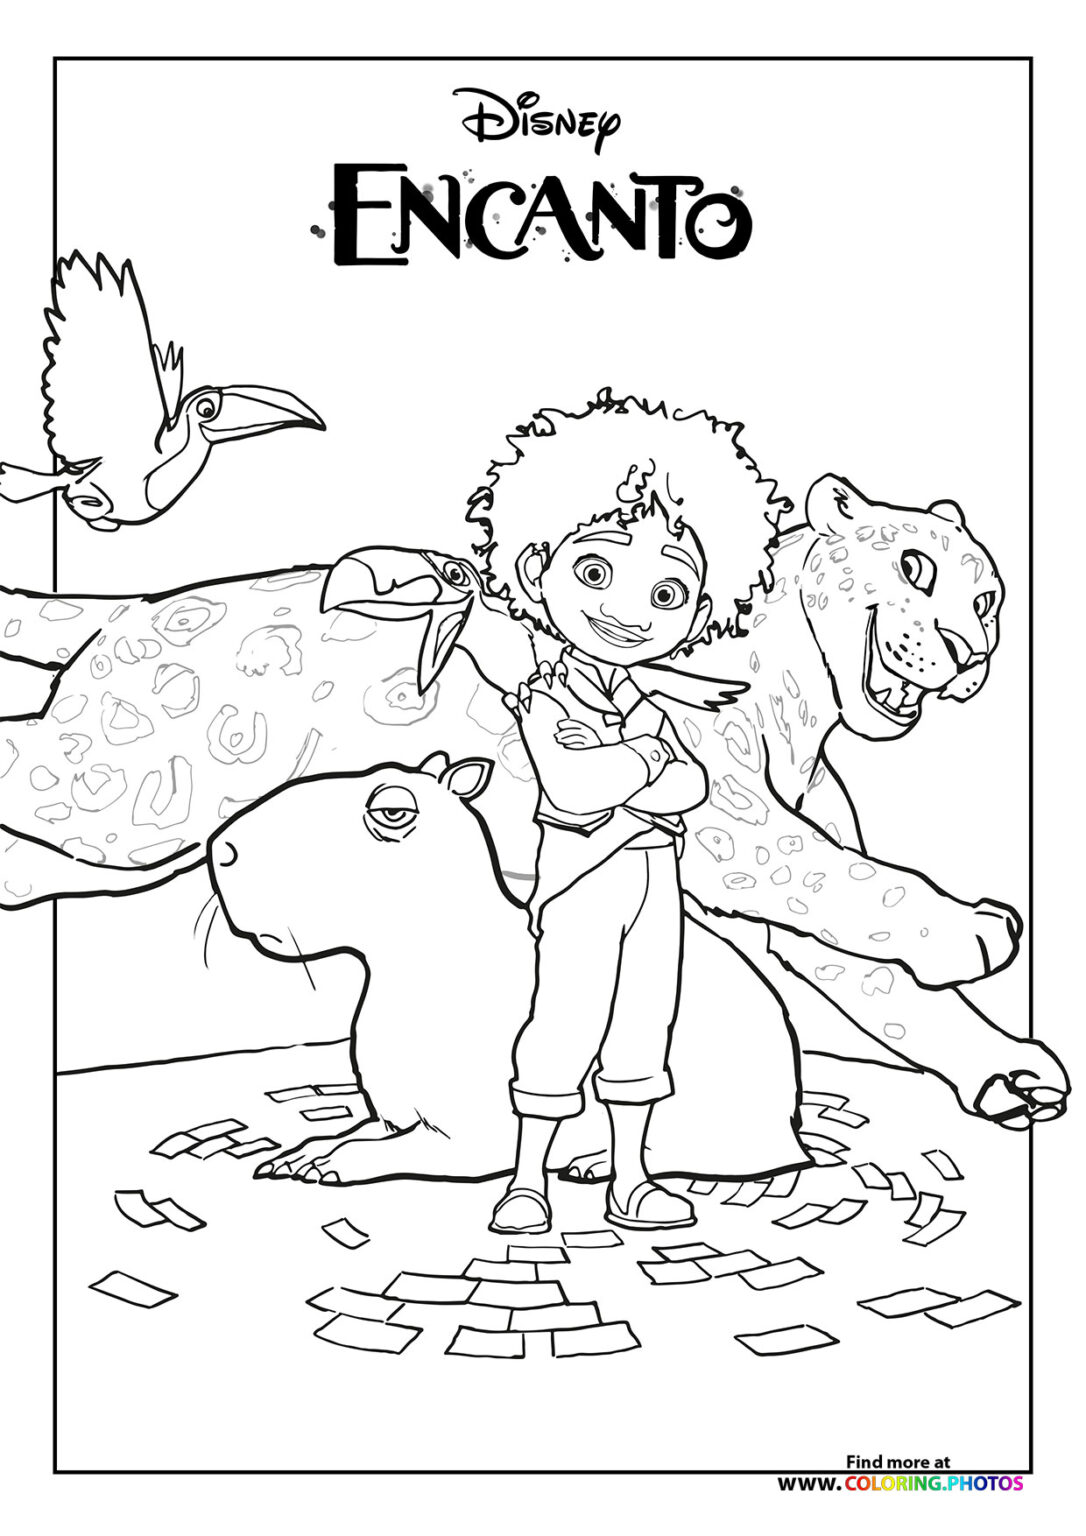 encanto-printable-coloring-pages